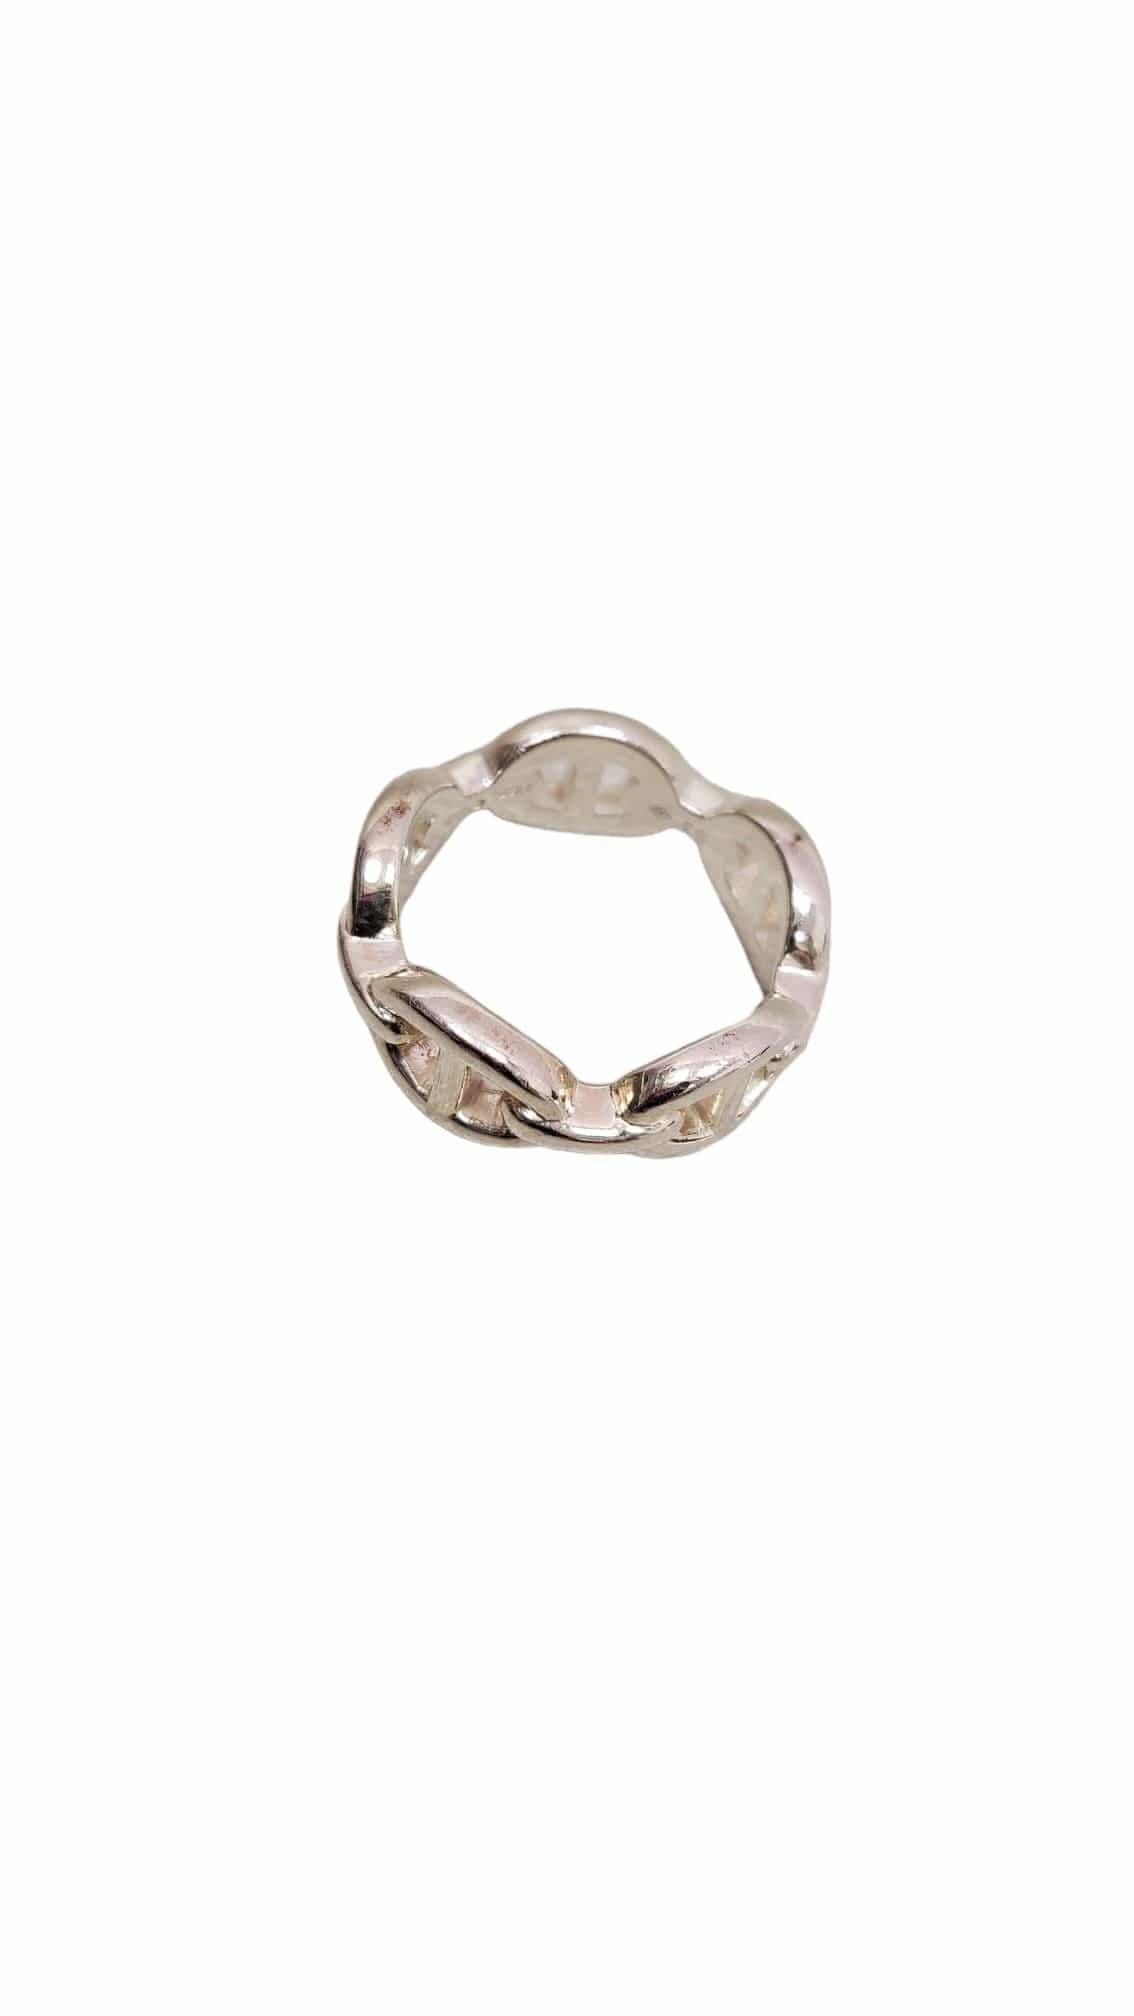 Hermès Hermes Chaine d'ancre Enchainee Ring Silver PM #53 SKC1373